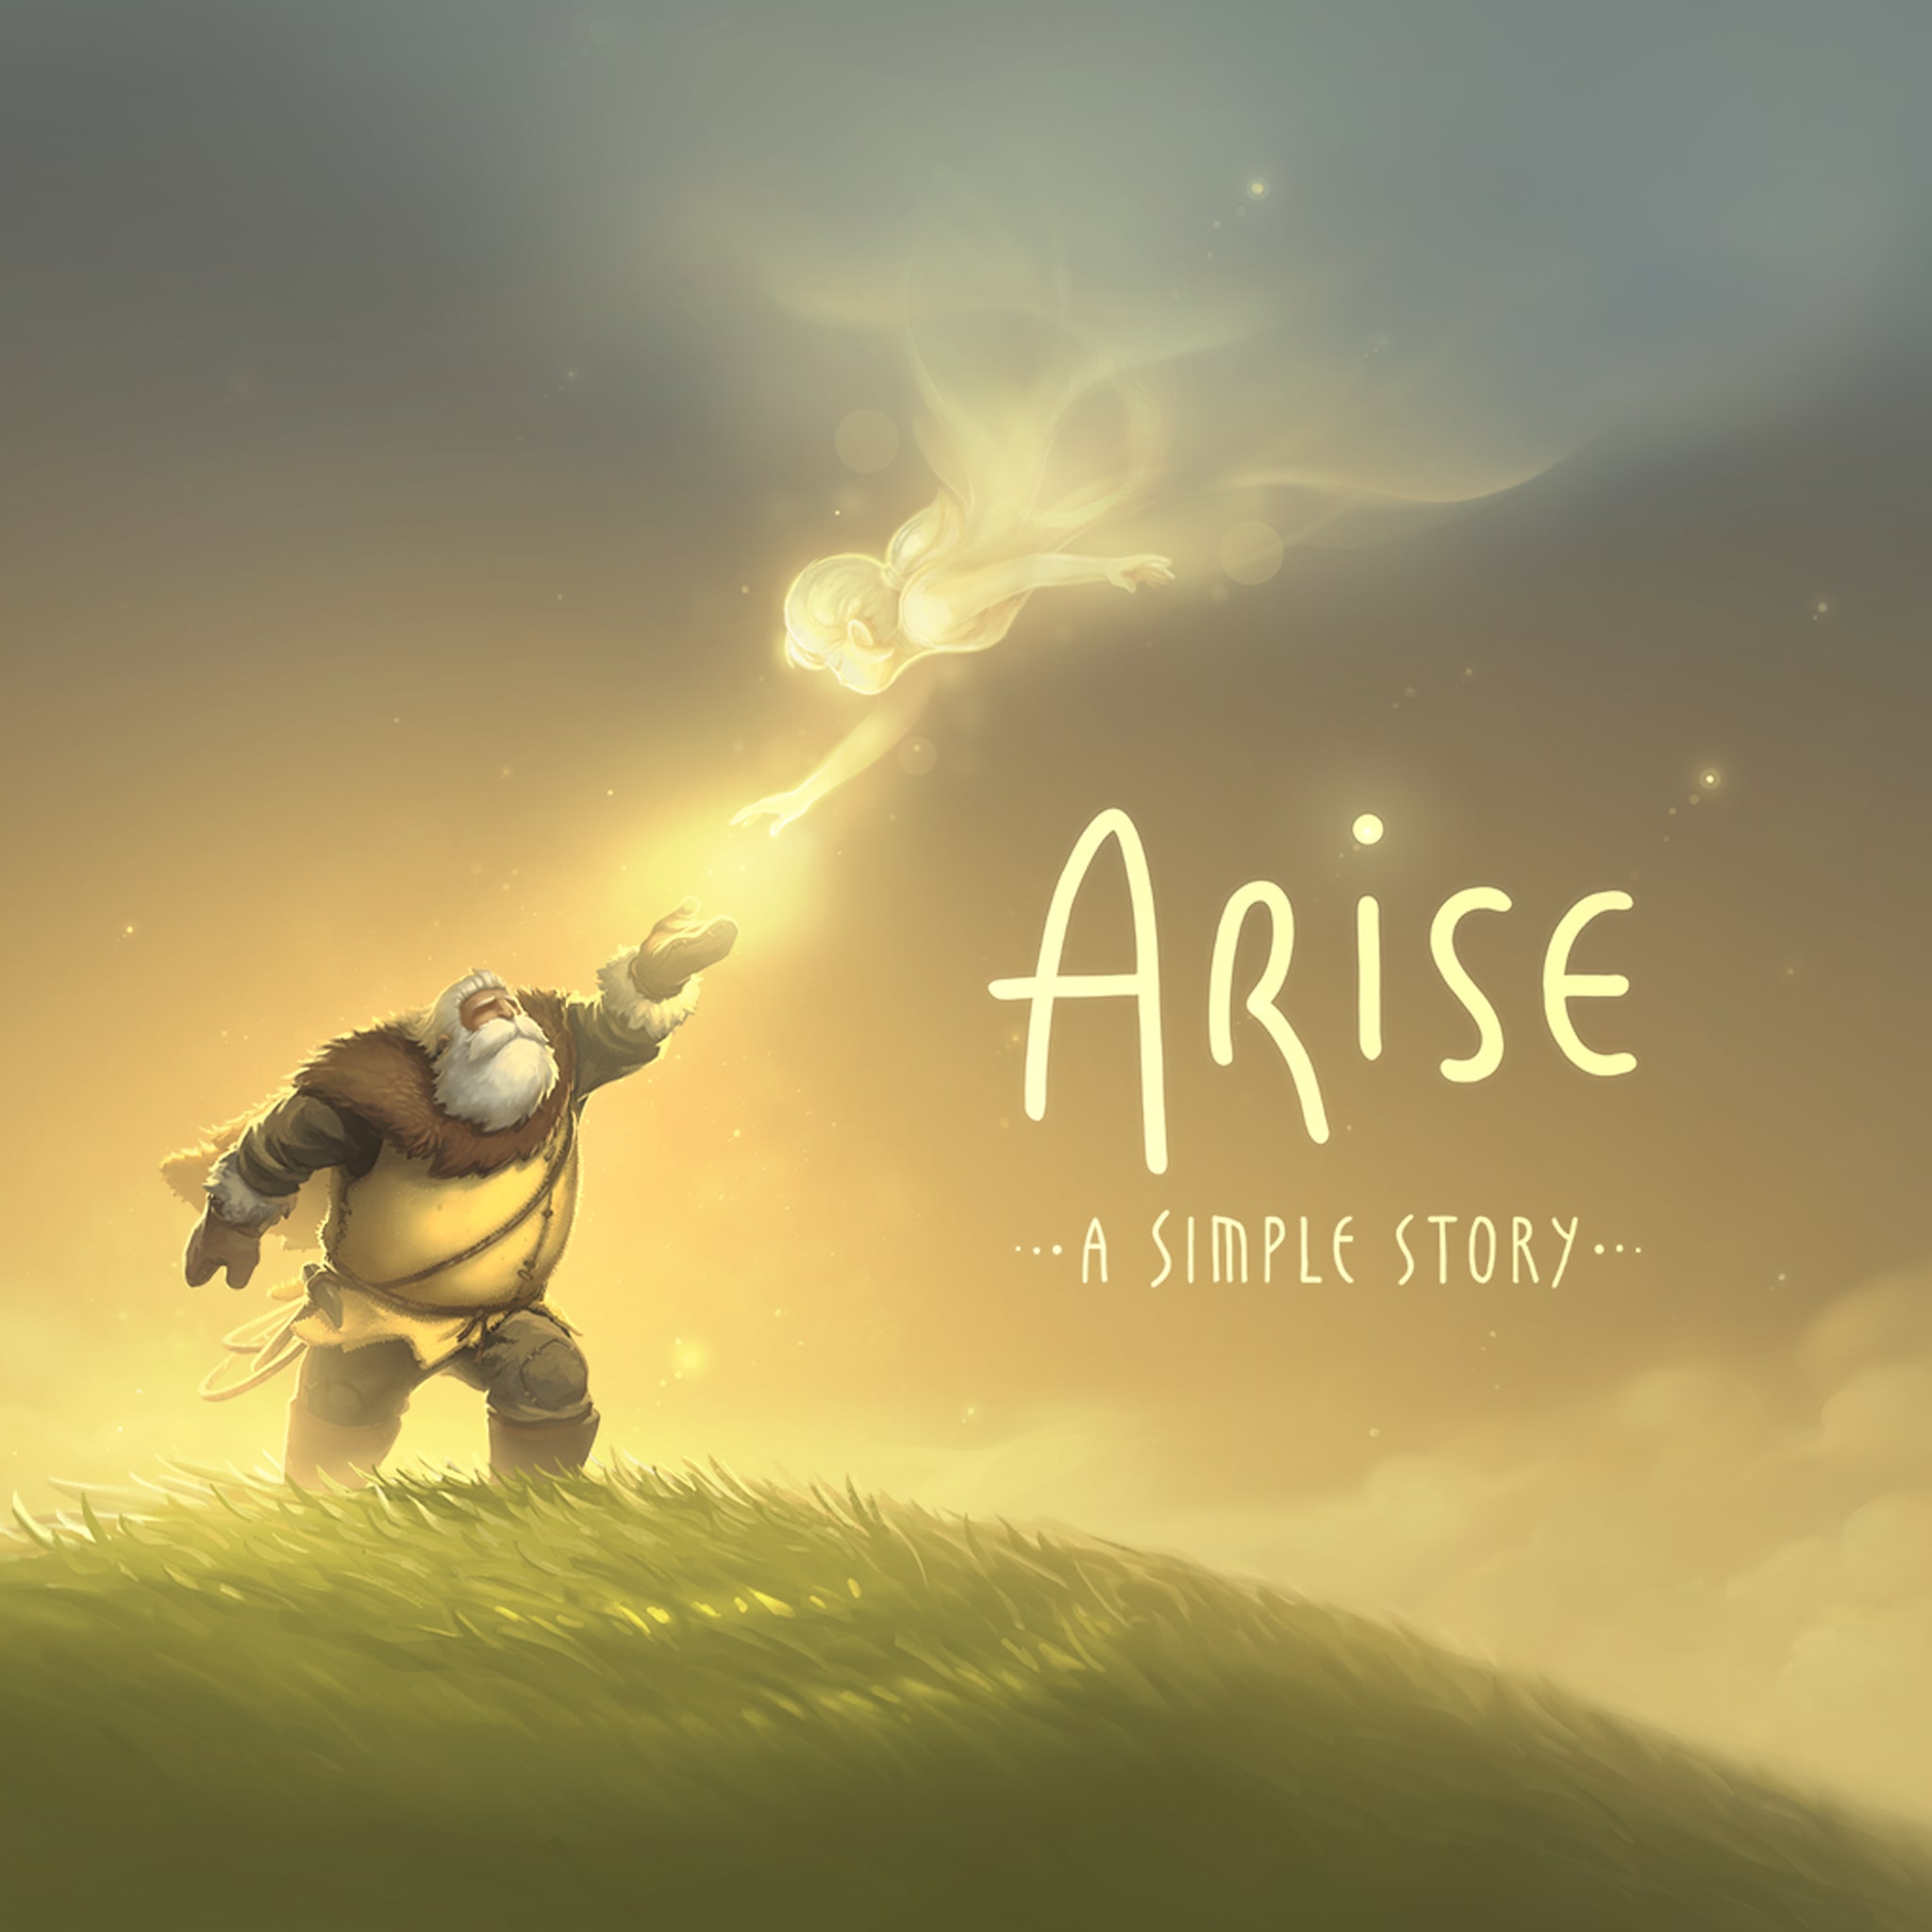 Arise: A simple story